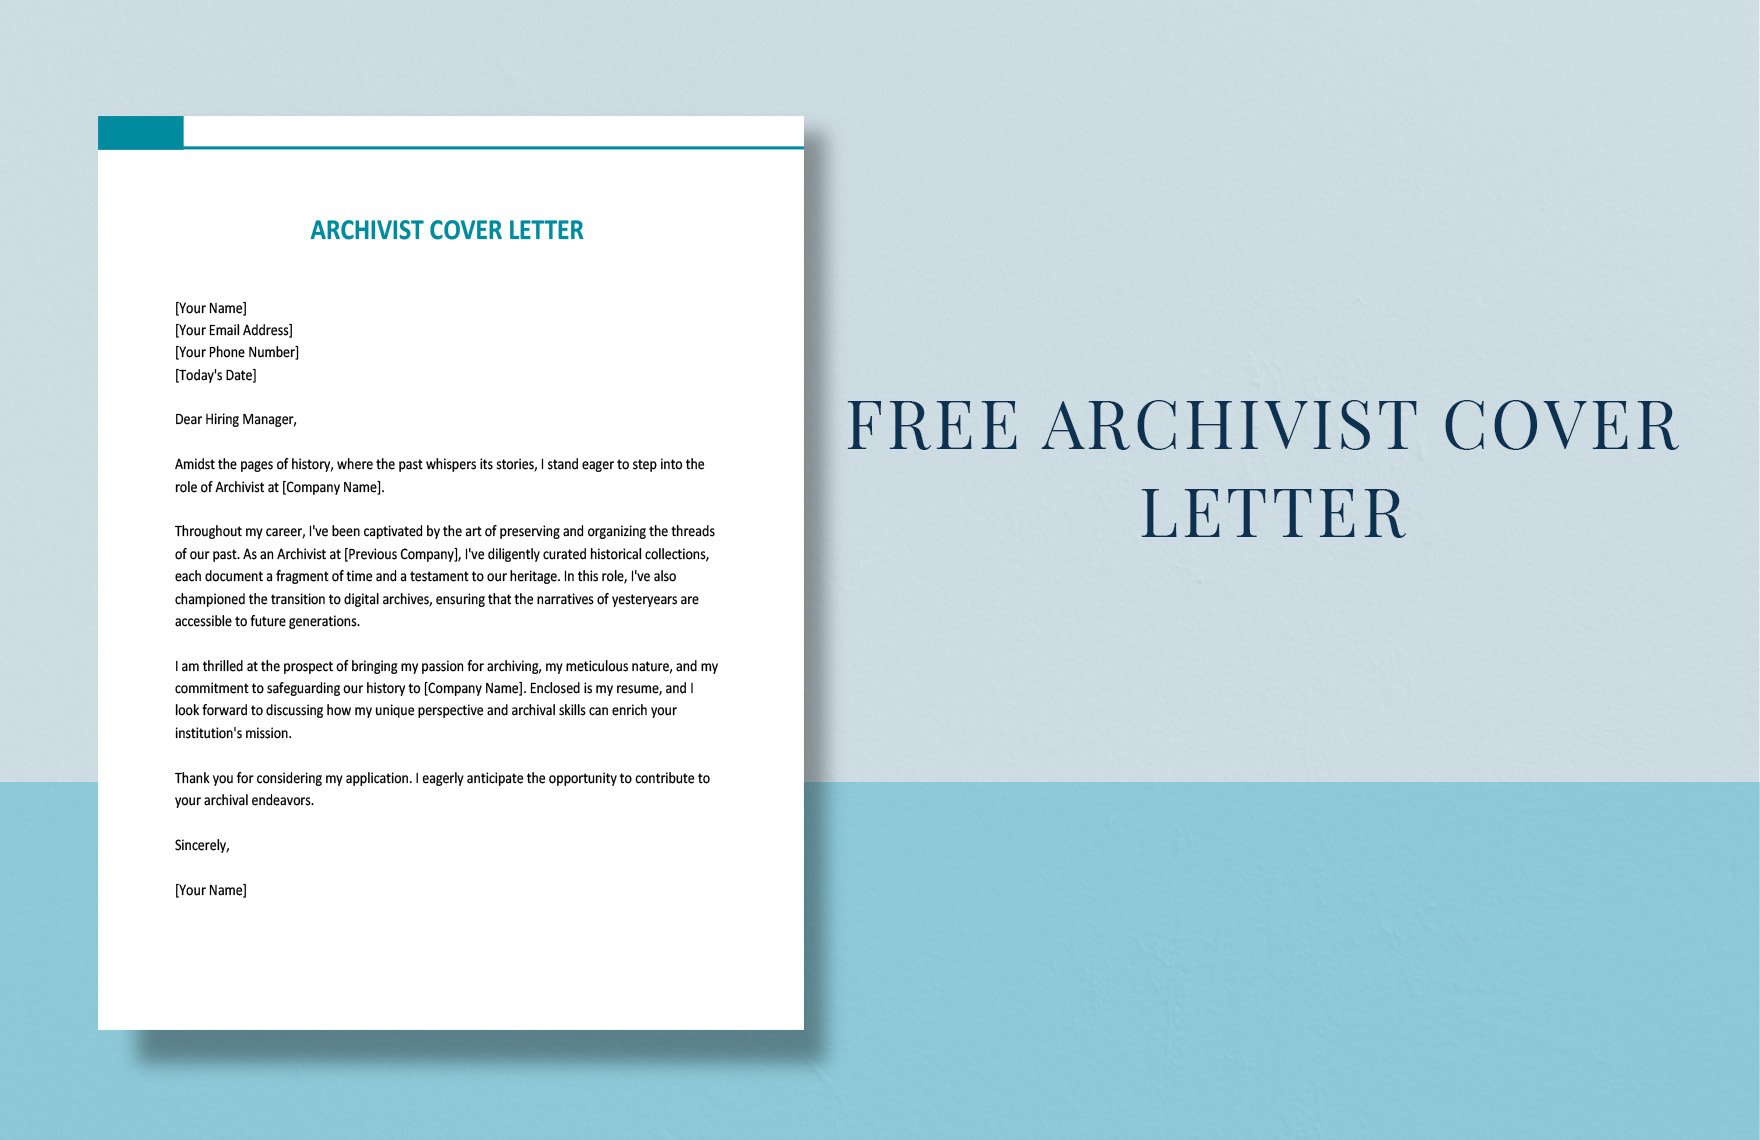 Archivist Cover Letter in Word, Google Docs